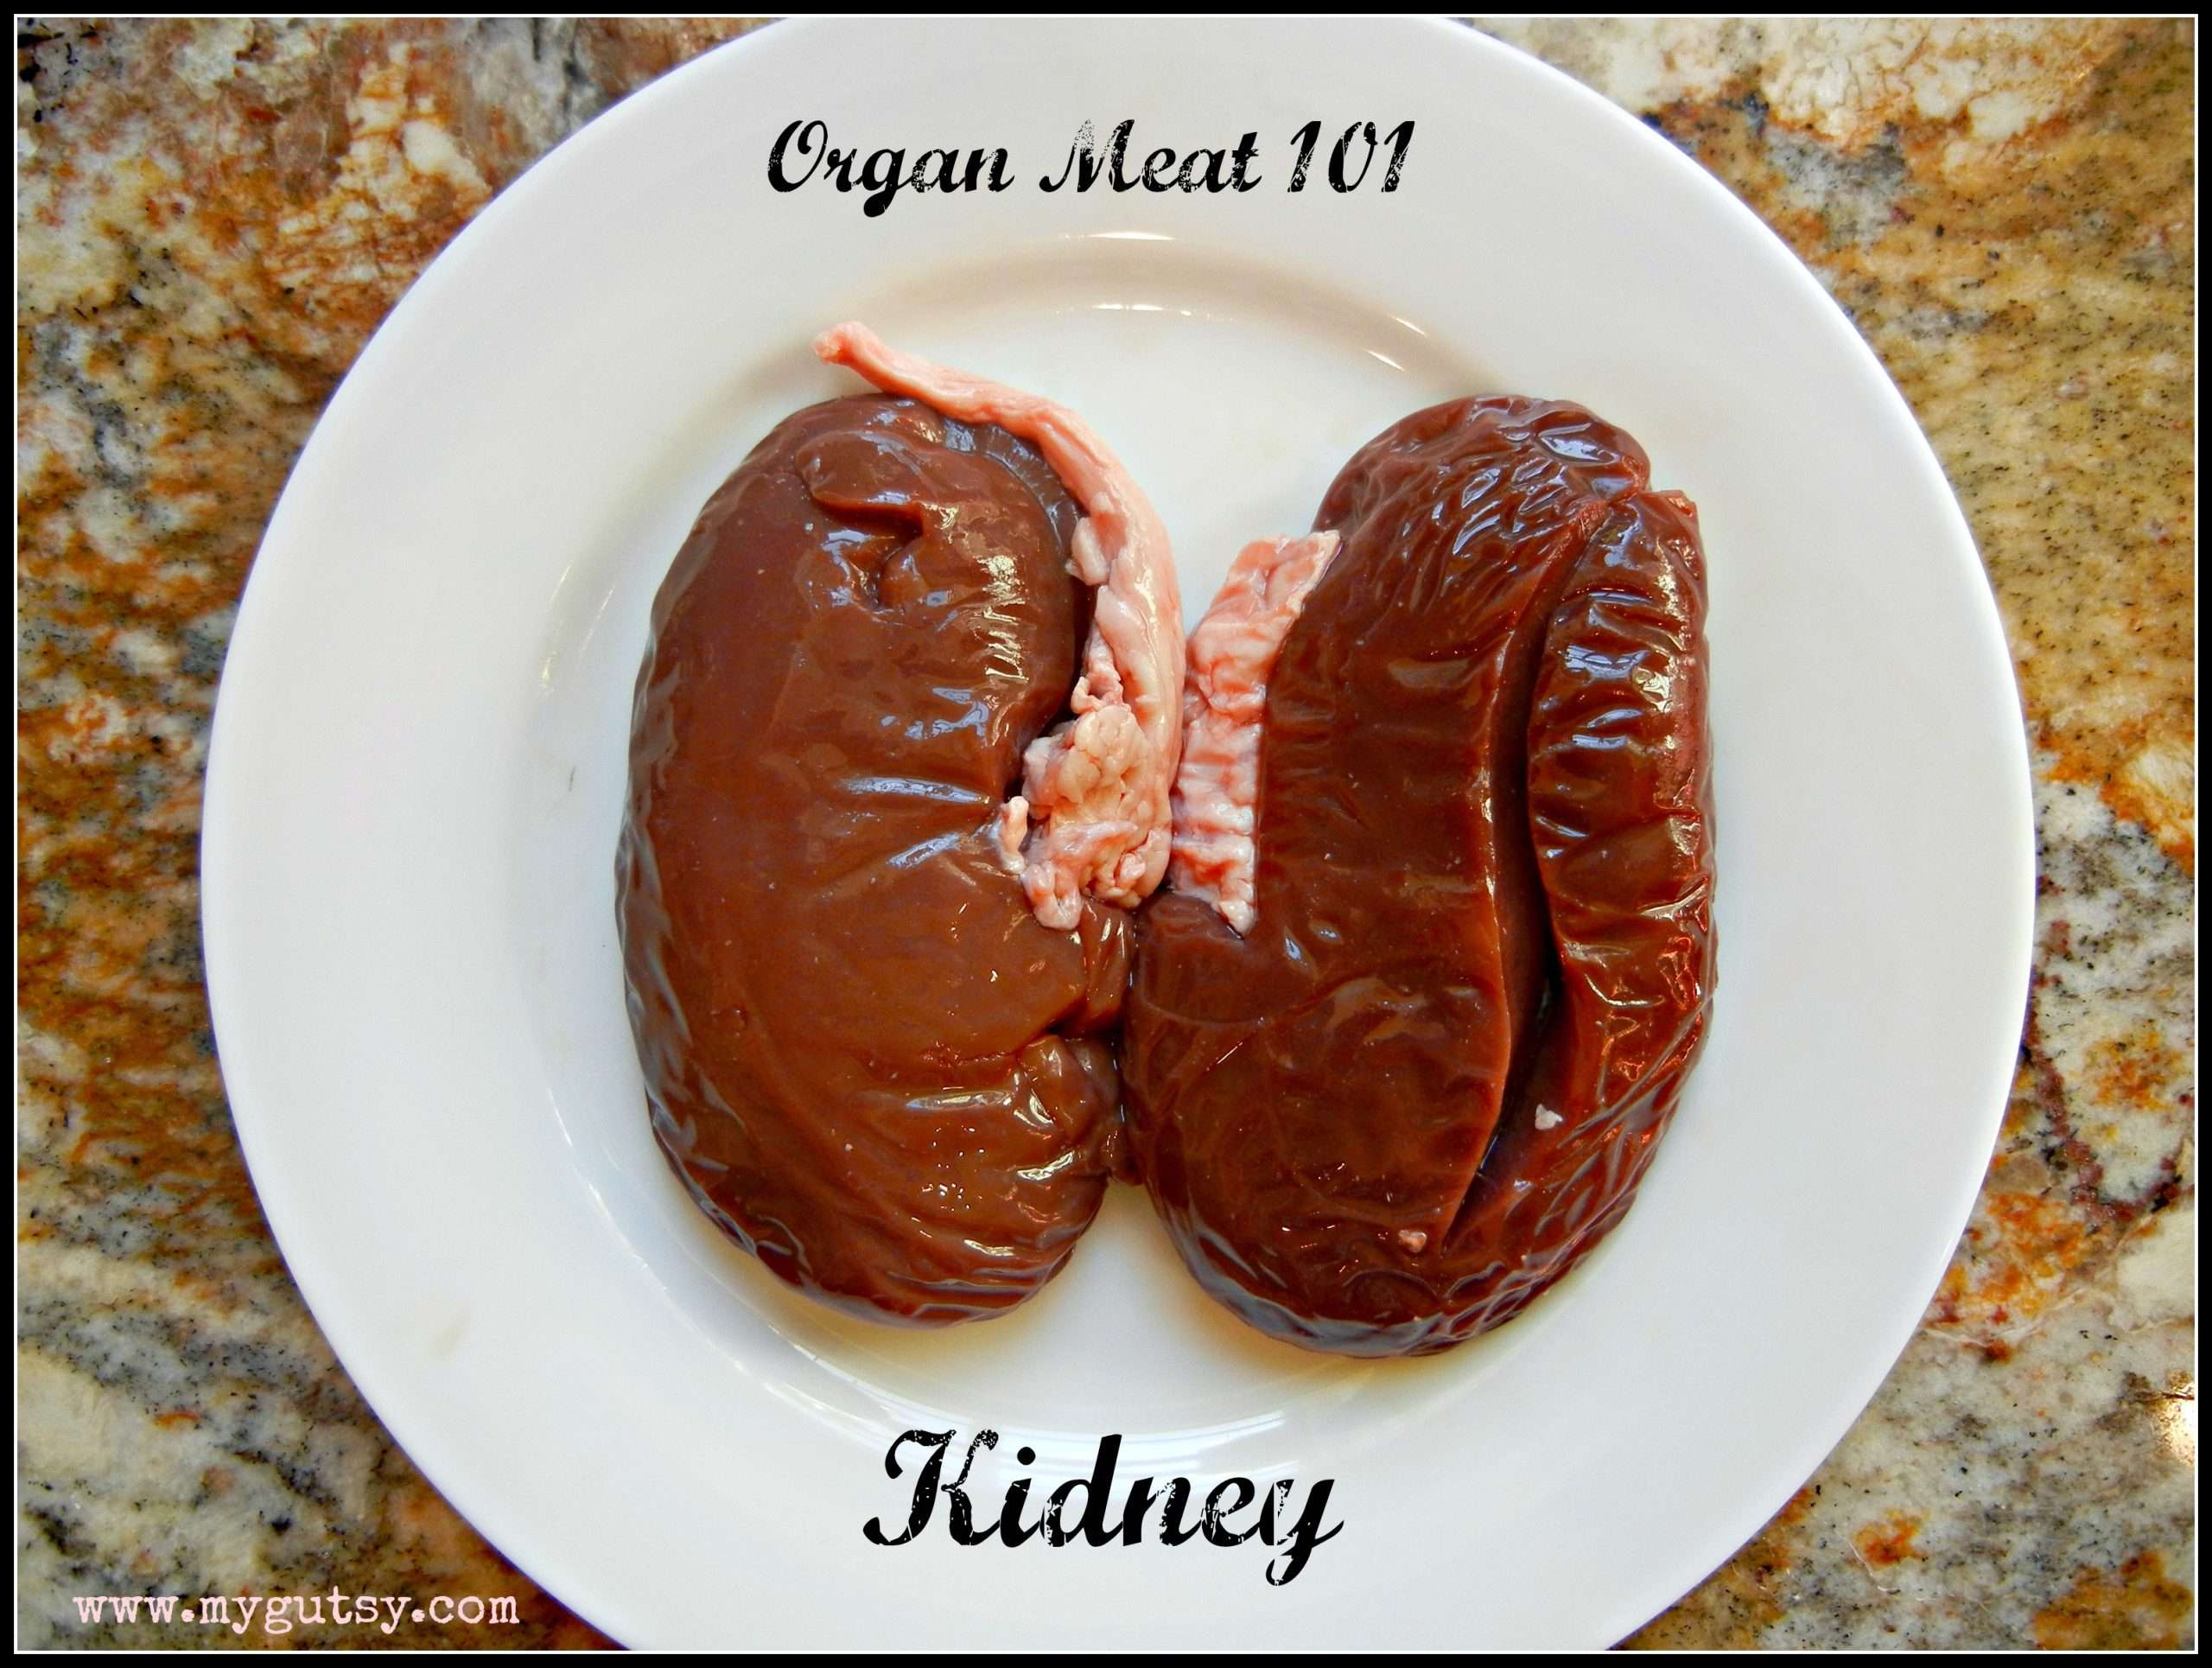 How to prepare a Kidney